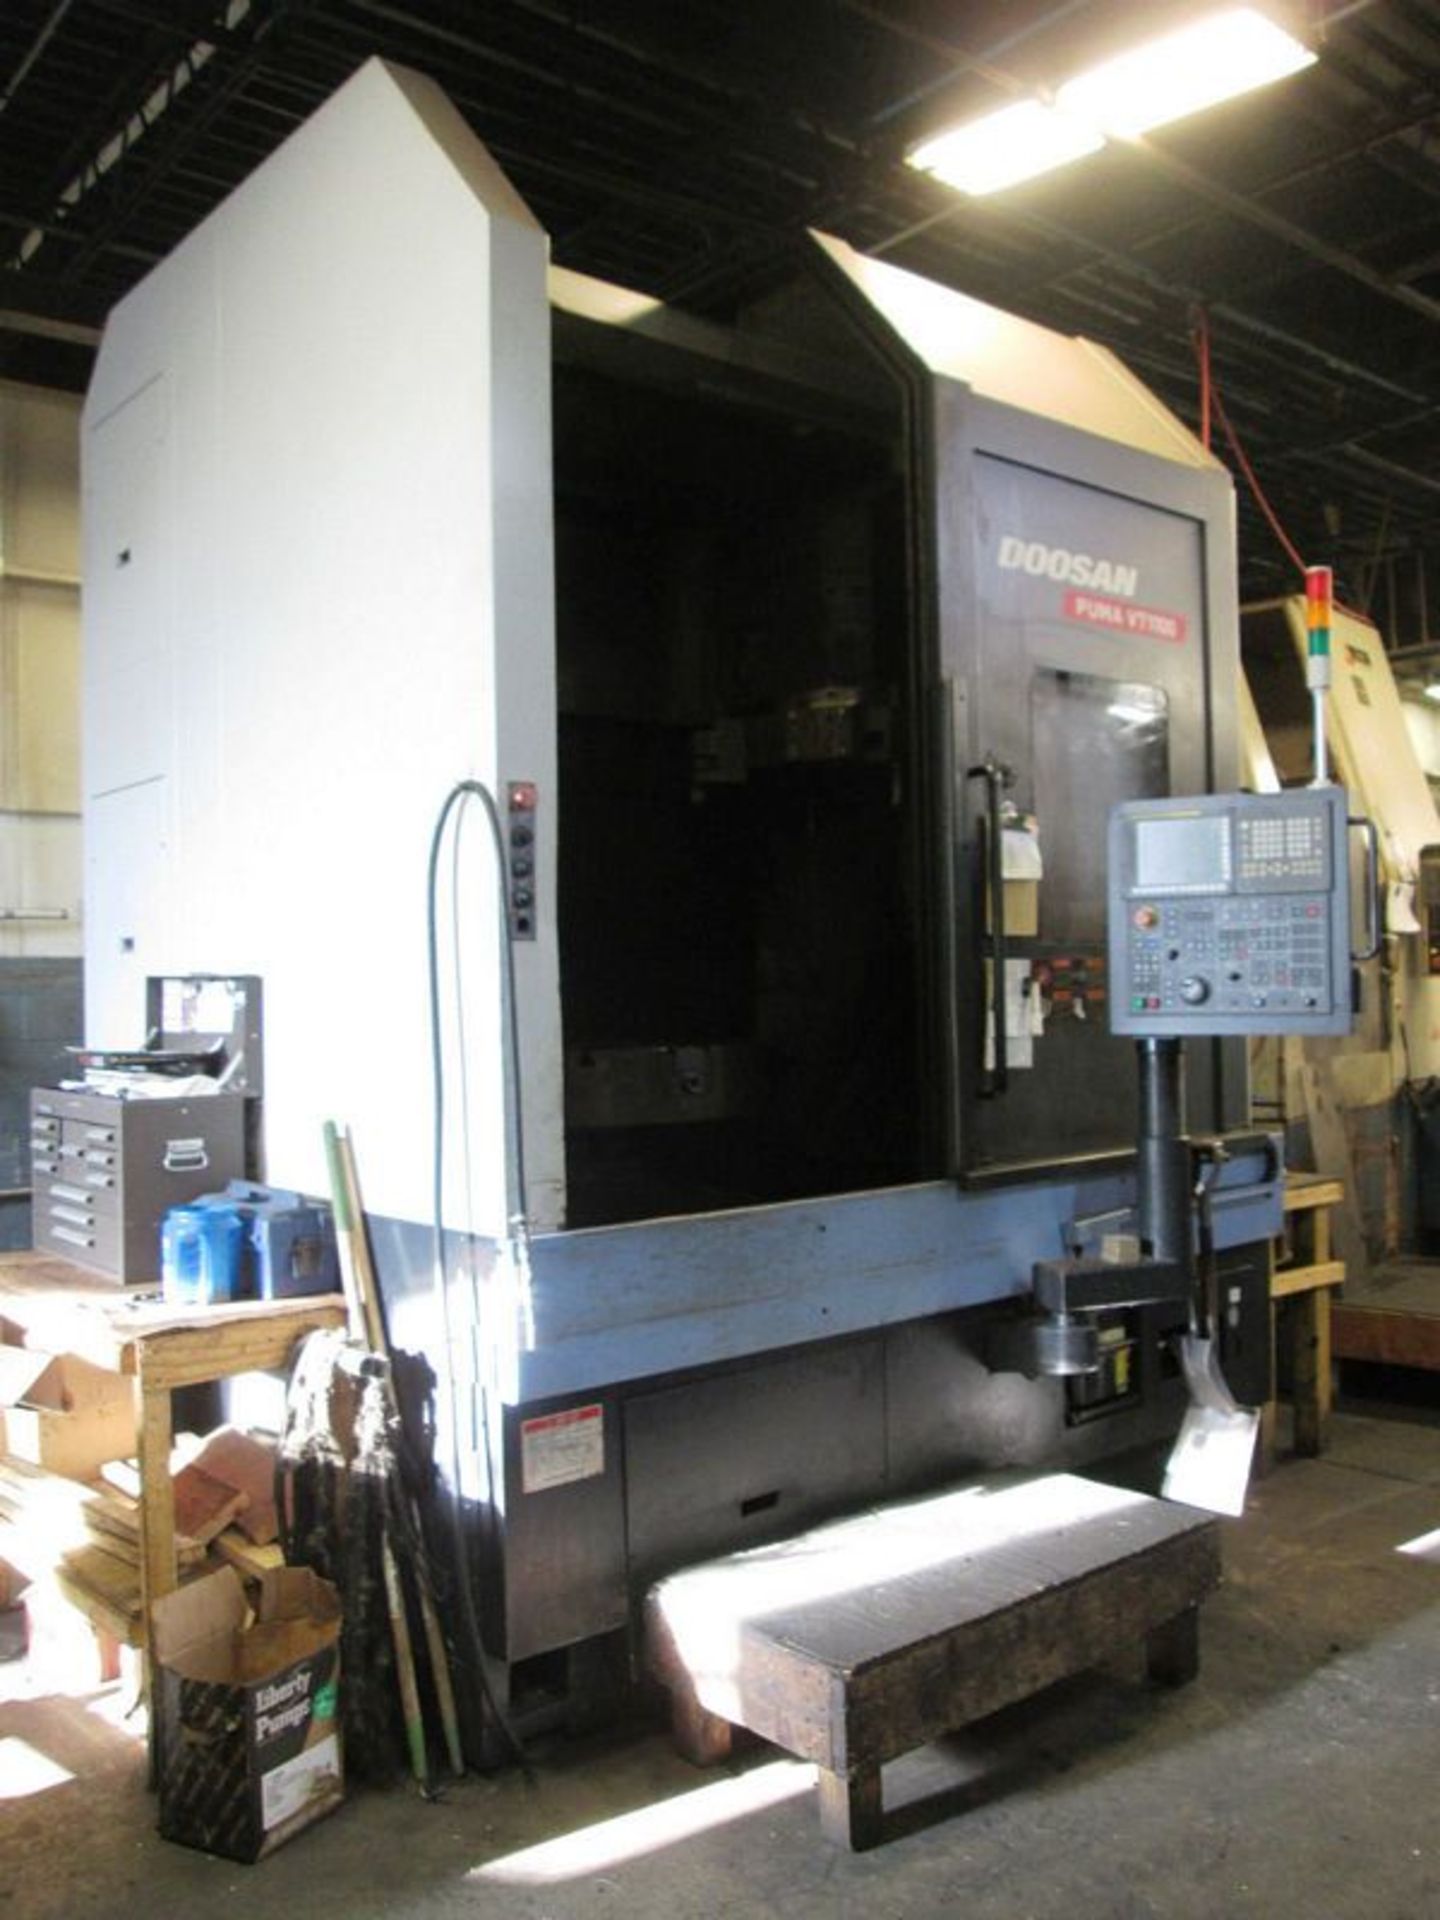 40" DOOSAN VT1100 2-AXIS CNC VERTICAL TURNING CENTER LATHE, NEW 2011 - Image 3 of 8